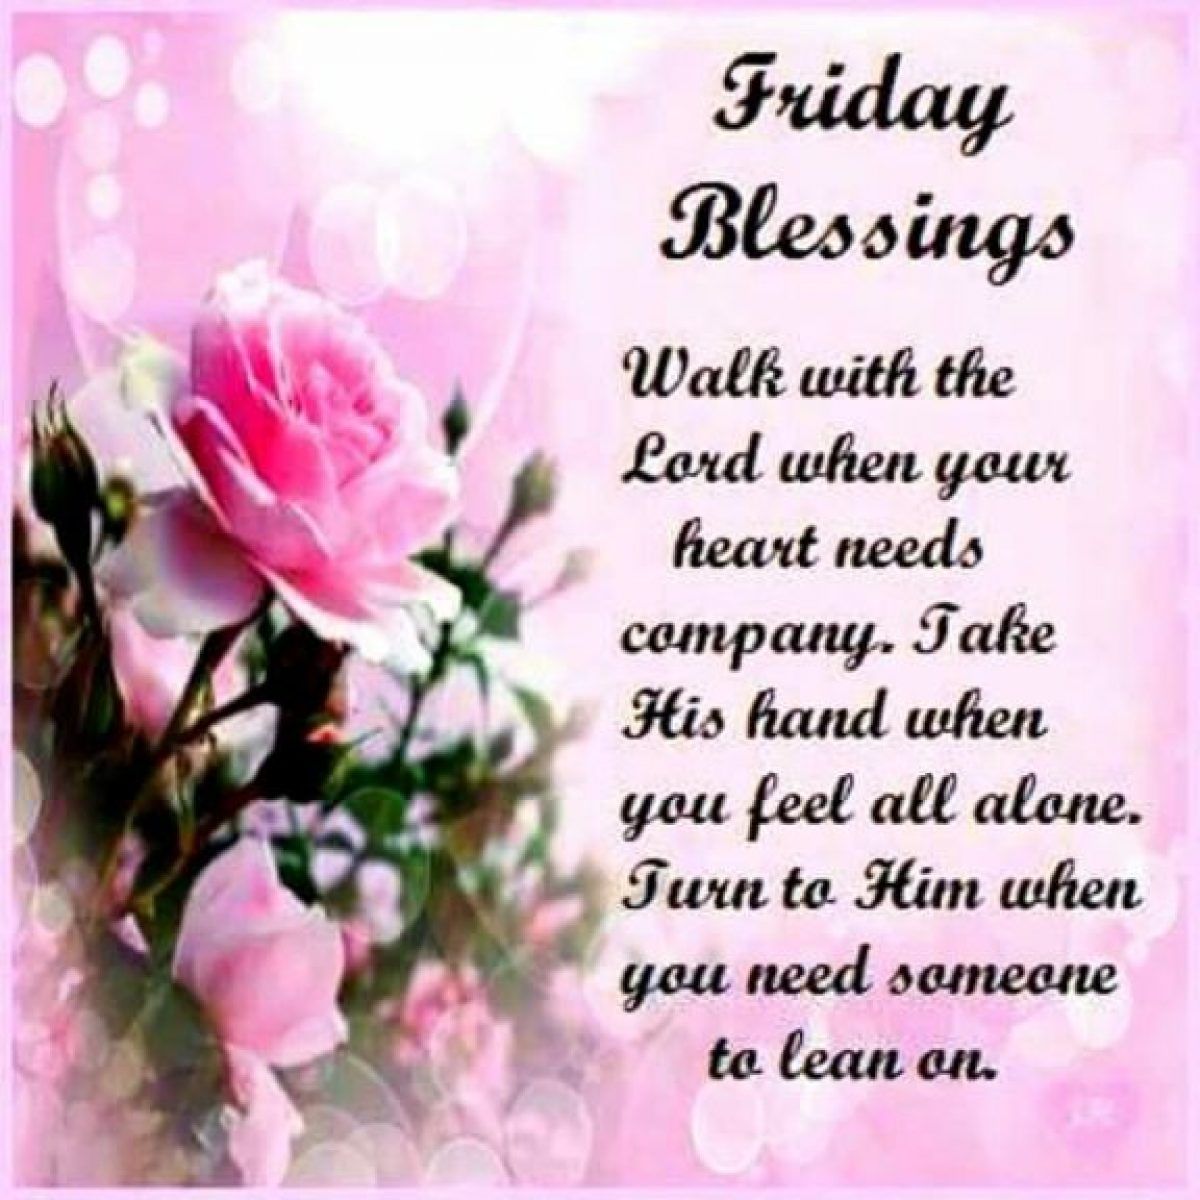 Friday Blessings Image, Quotes, Picture and GIF Photo